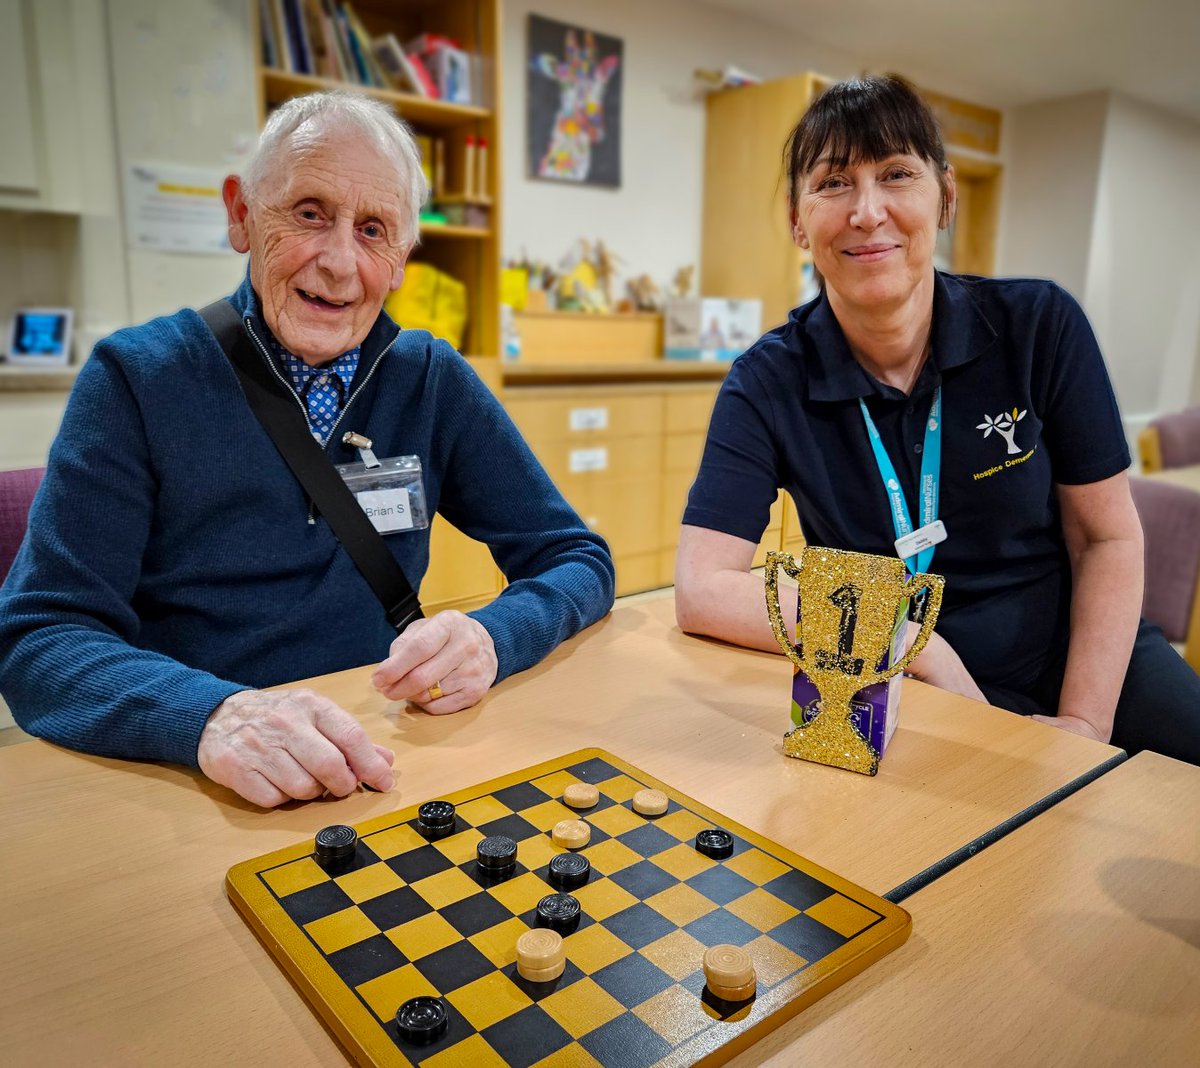 Brian attends our Dementia Care Services every week, but the final hour of his visit is often his favourite as our Admiral Nurse Debby explains: 🗣“For a number of weeks now, at the end of the day I have had the pleasure of sitting down with Brian to play in what has become an